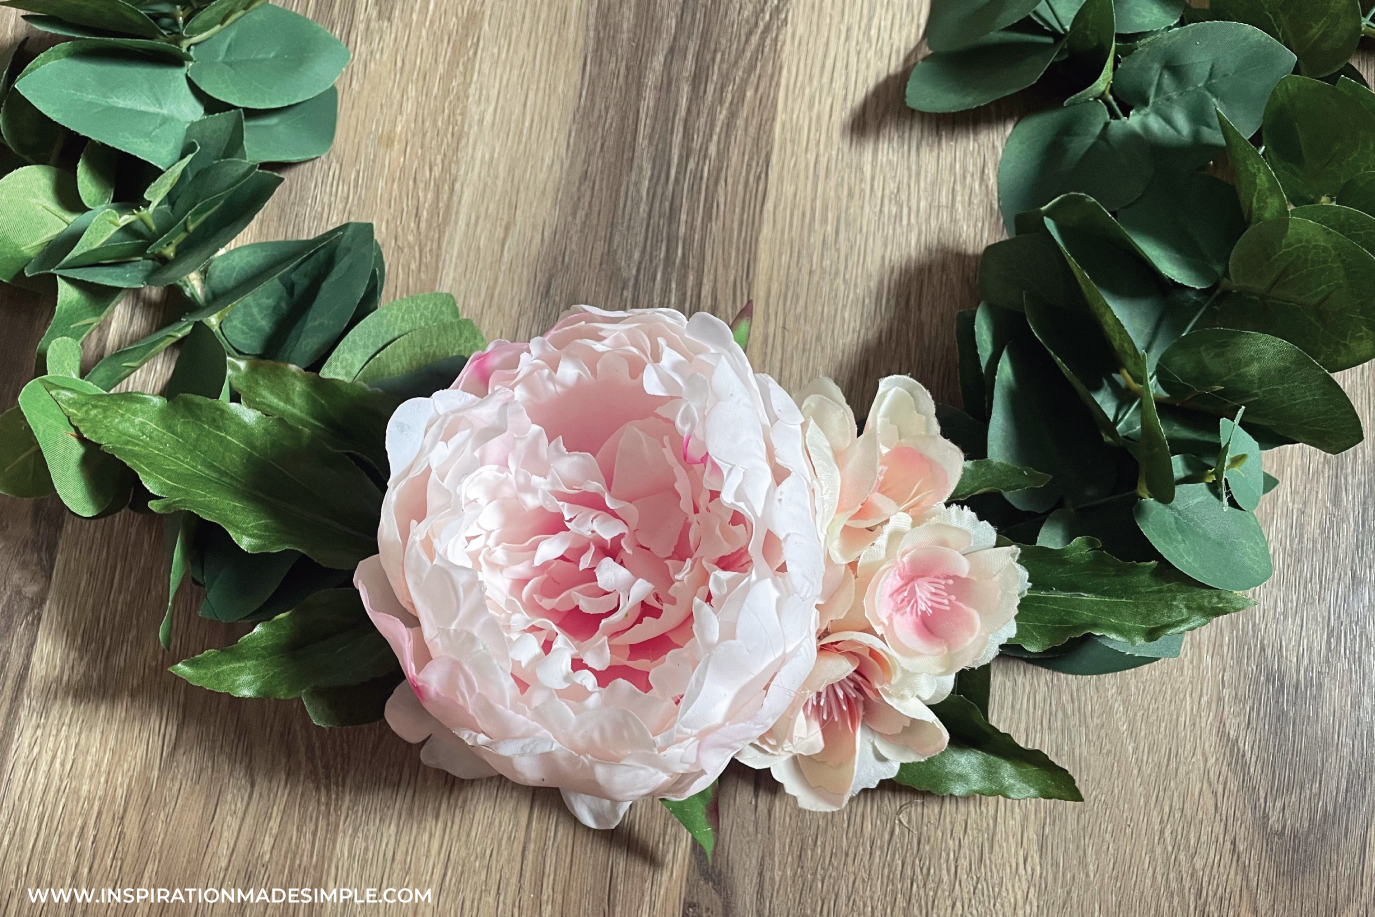 How to make a floral wreath